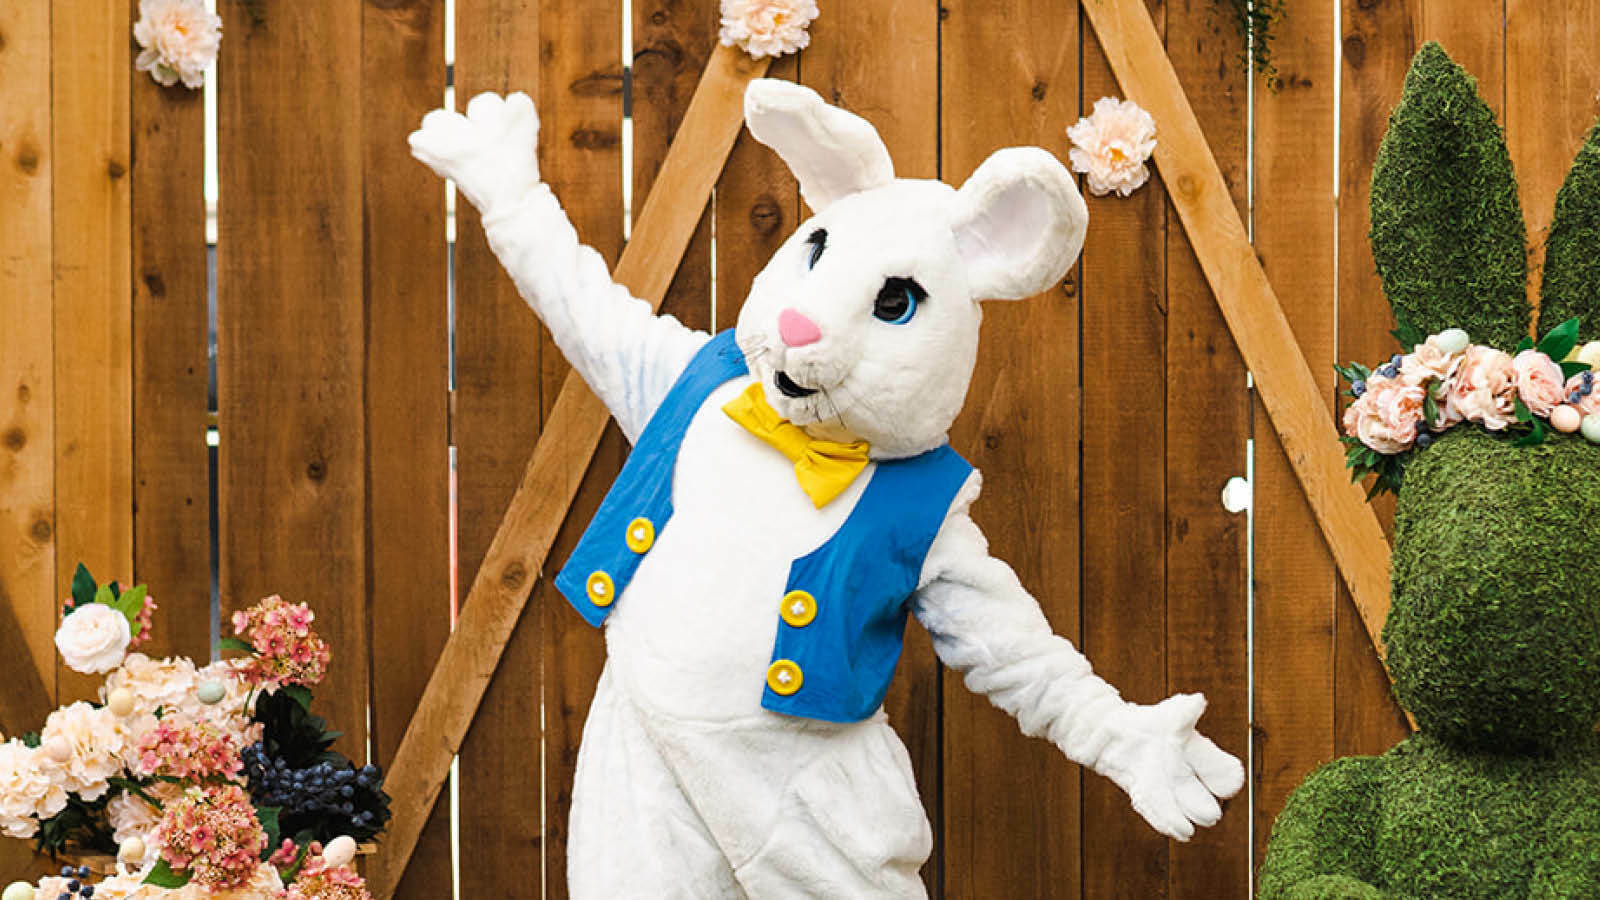 Kid's Silent Disco Dance Party with the Easter Bunny, Langford, British Columbia, Canada